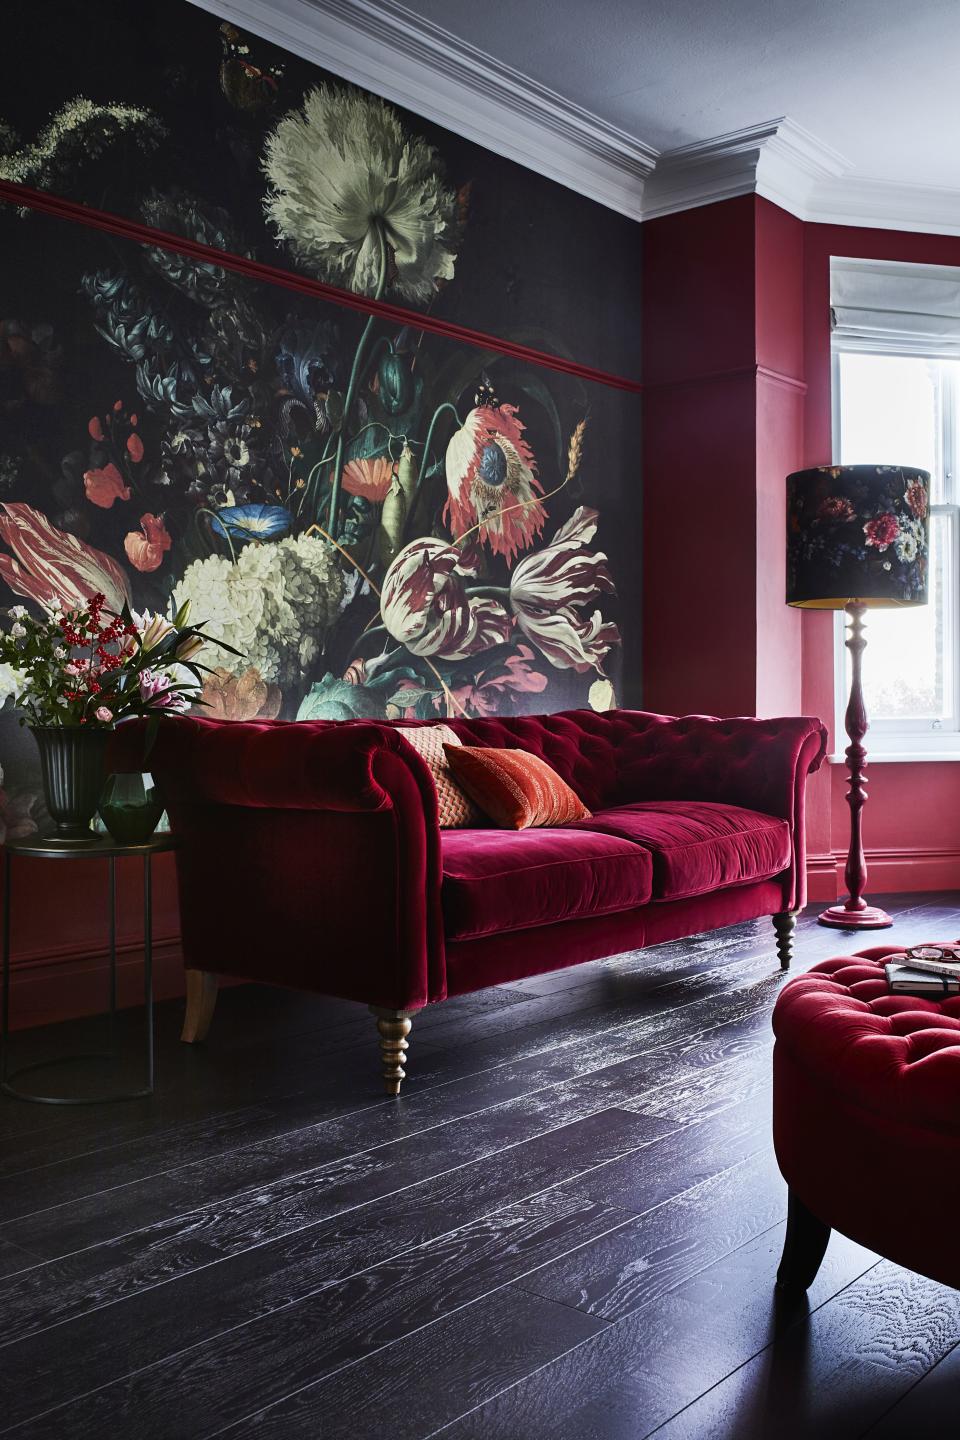 12. Invest in a dramatic mural for an accent wall